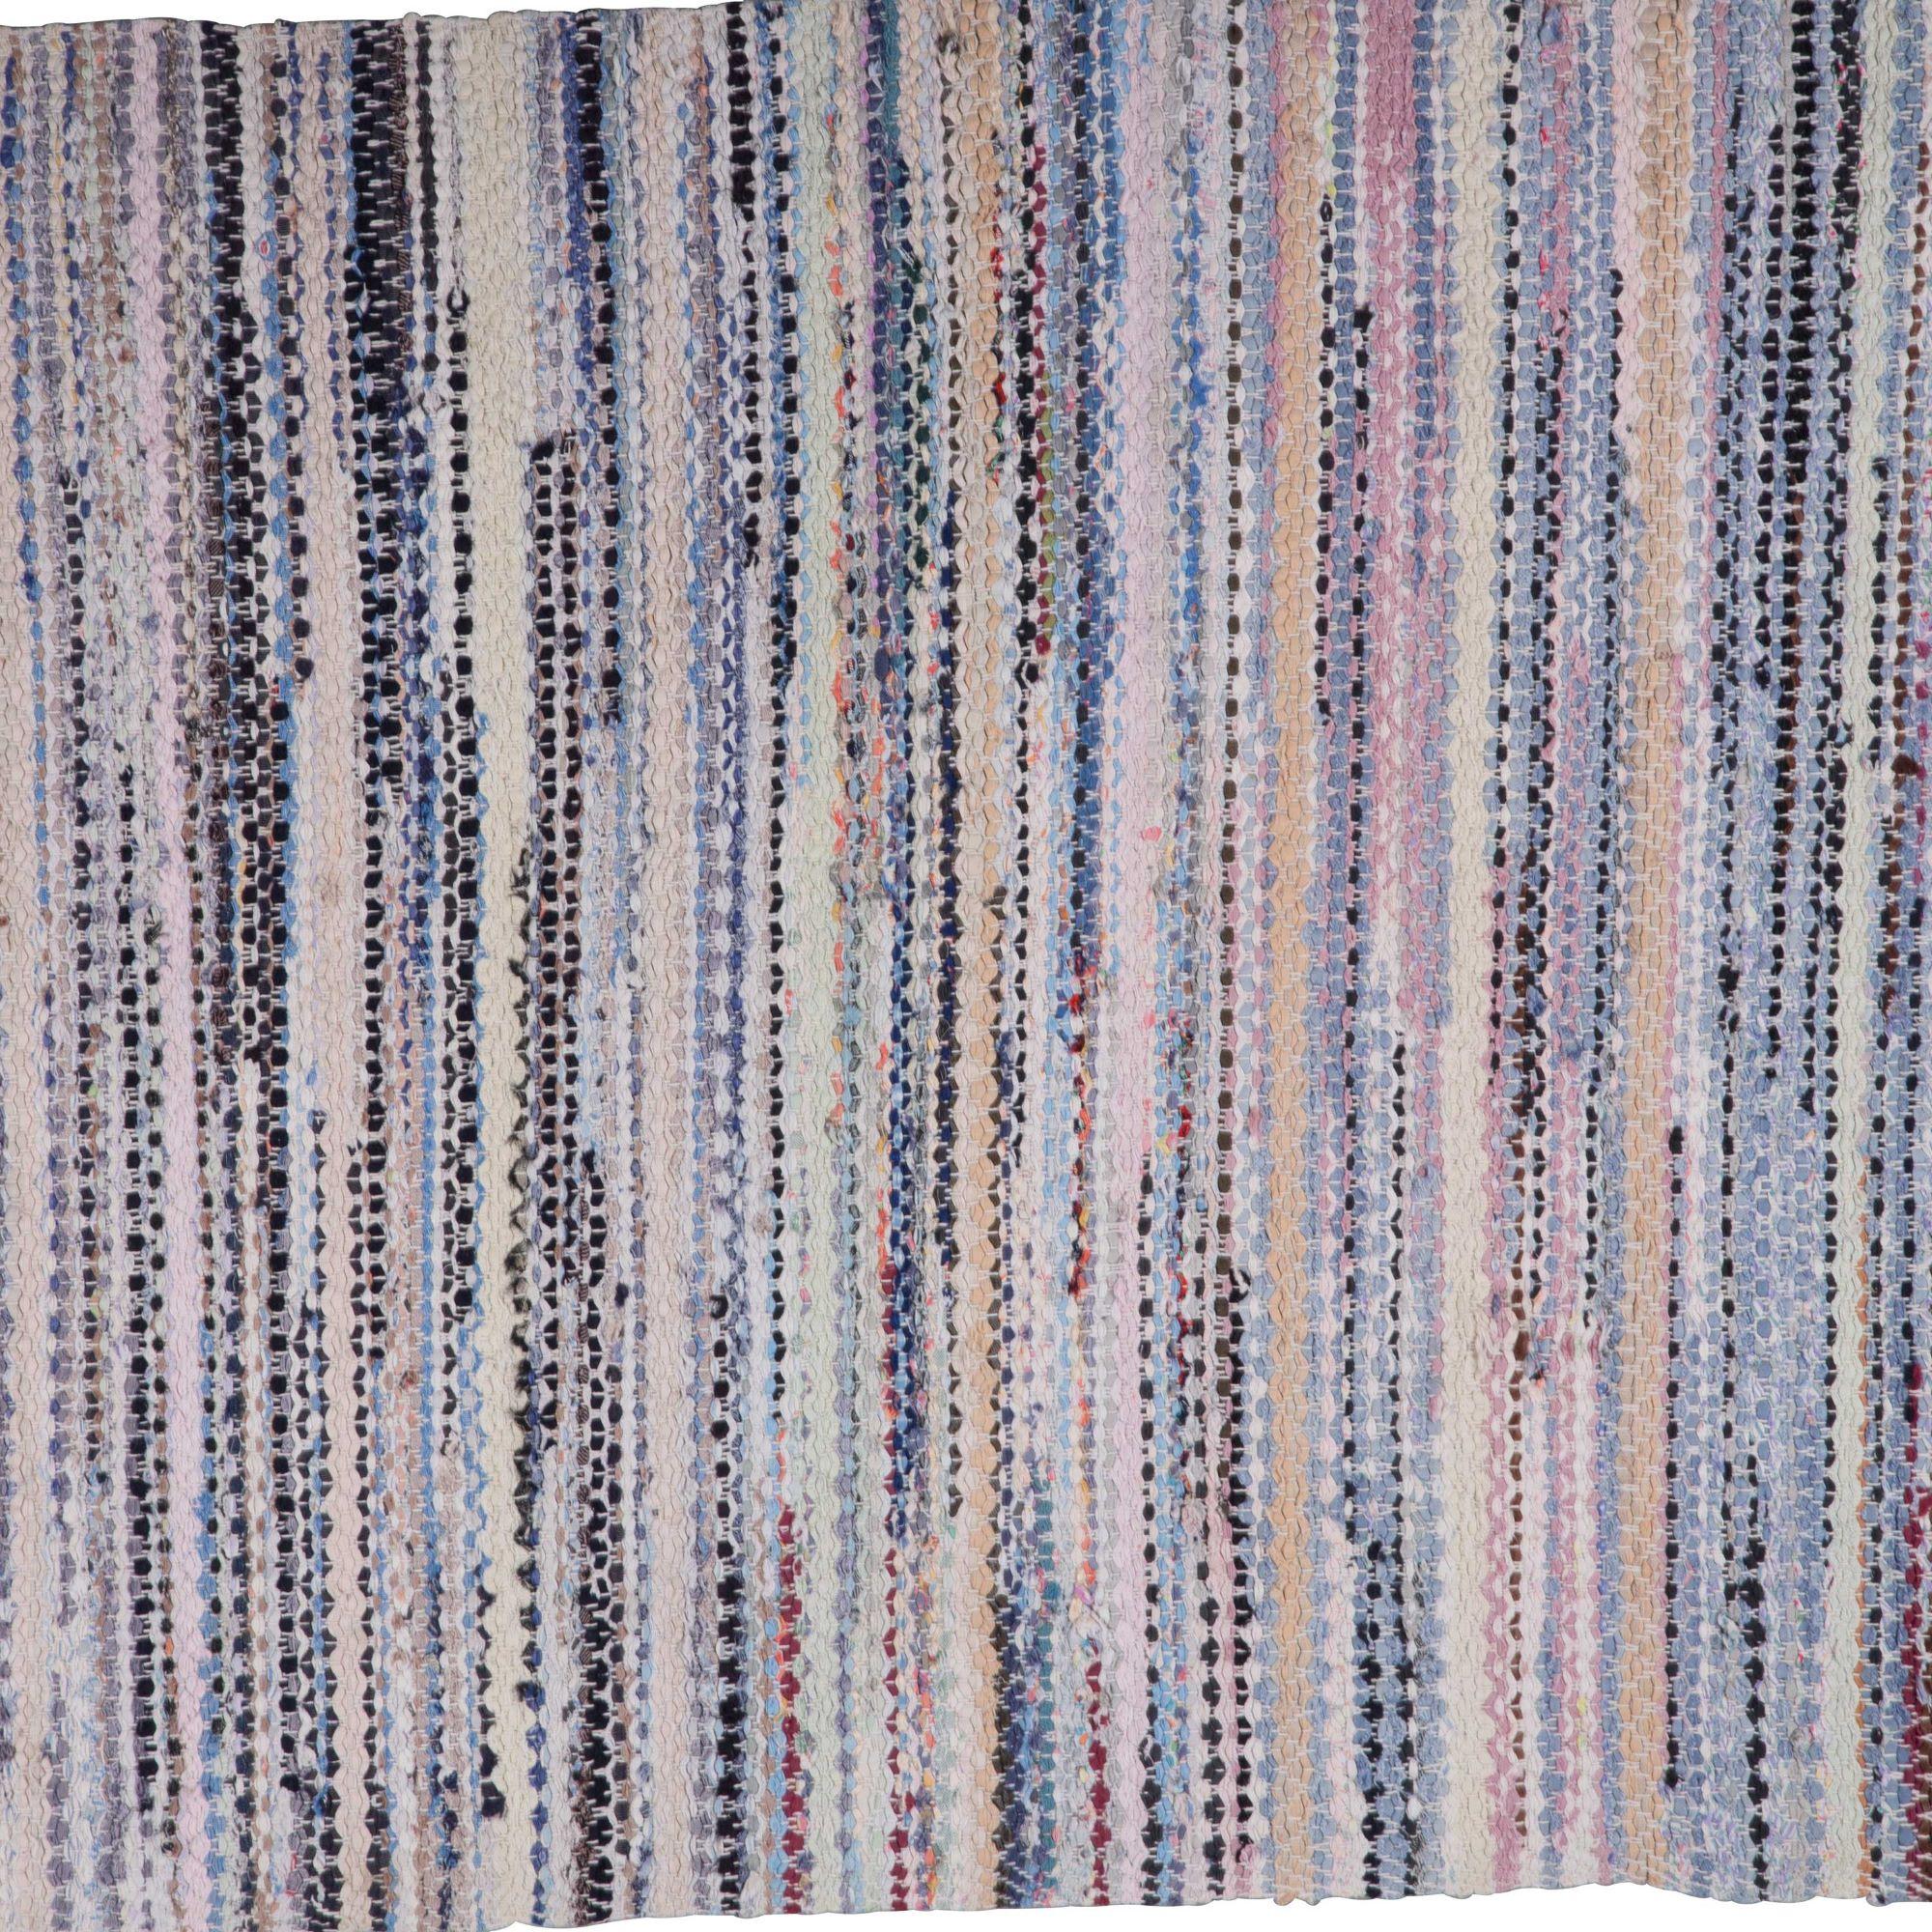 Decorative Swedish handwoven rug, over three meters in width, woven in soft muted tones.